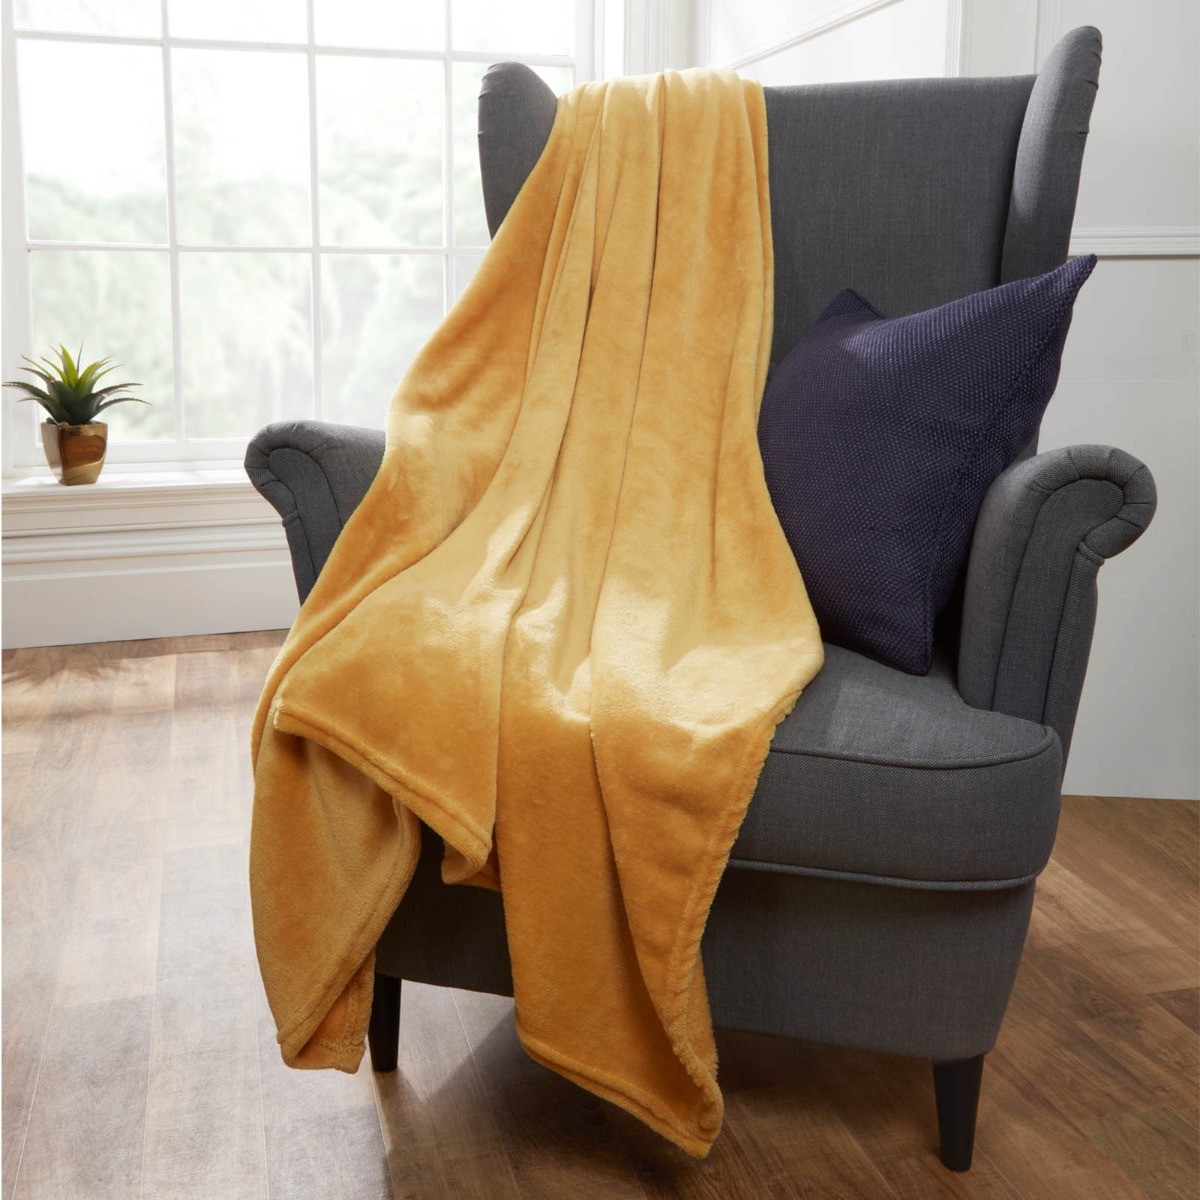 Brentfords Supersoft Throw, Ochre Yellow - 60 x 80 inches>